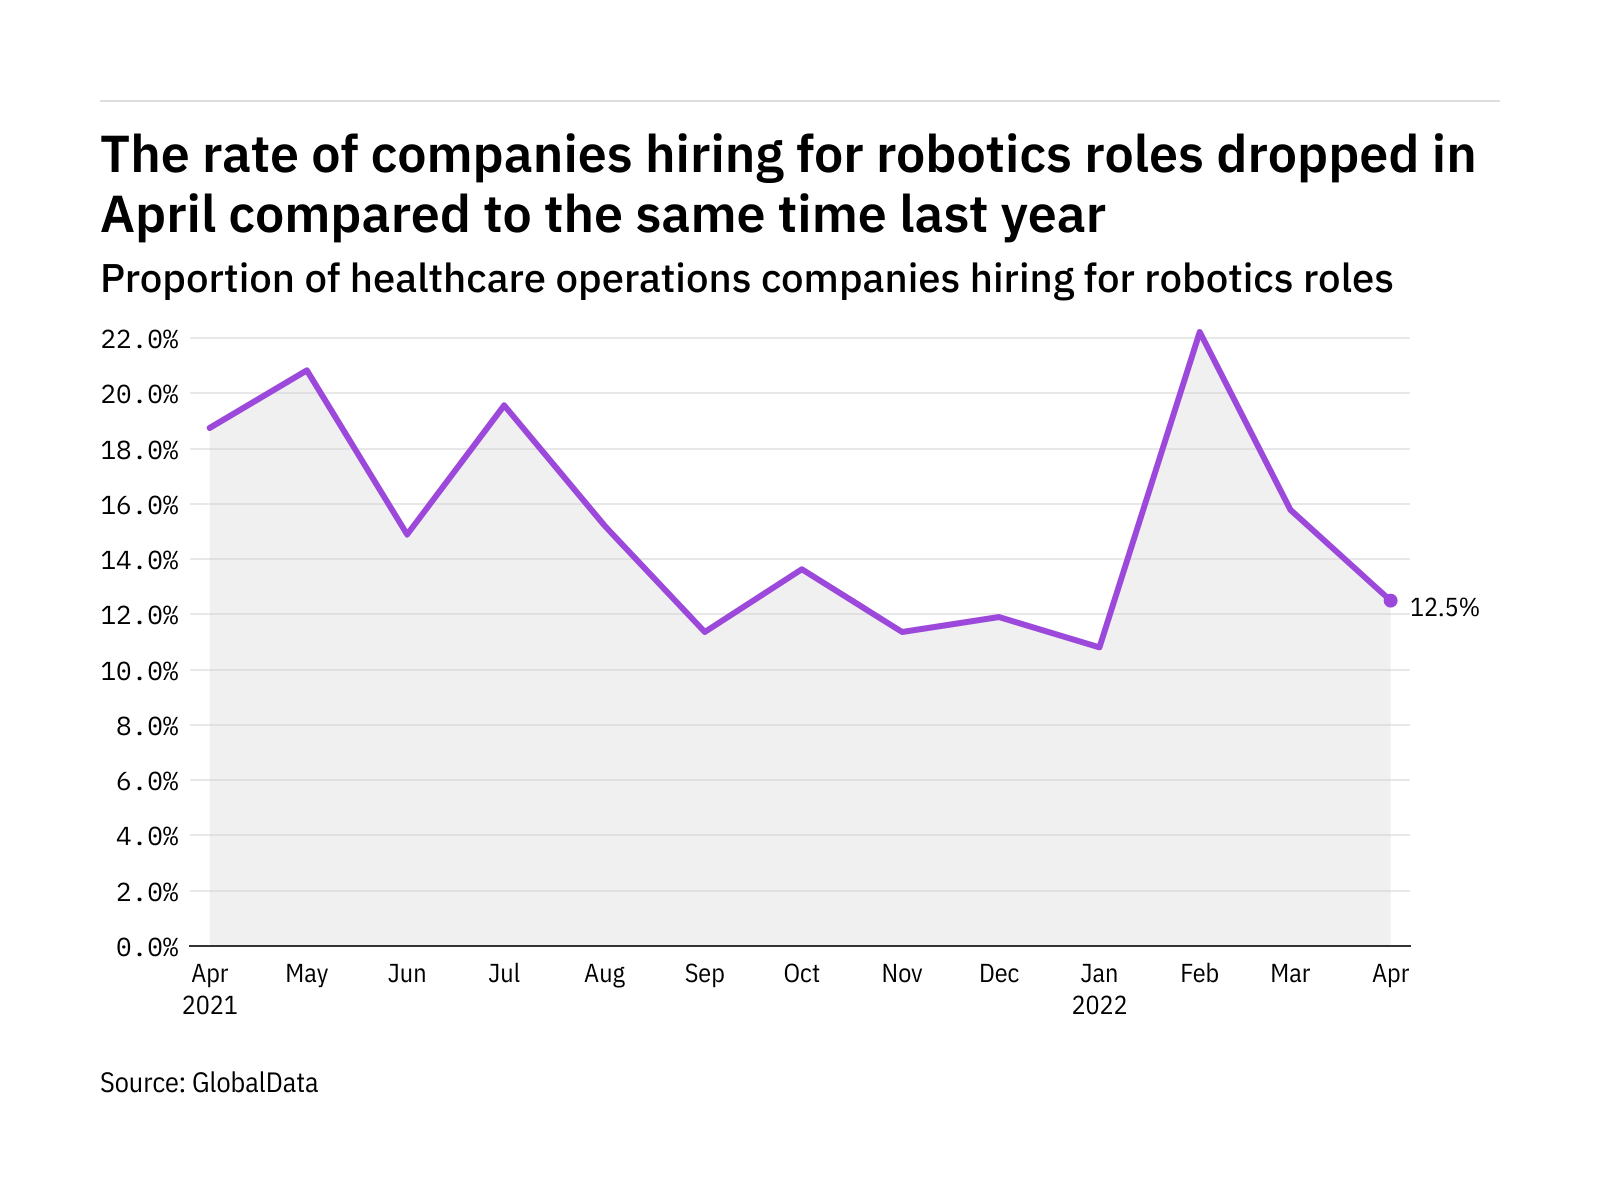 Robotics hiring levels in the healthcare industry dropped in April 2022